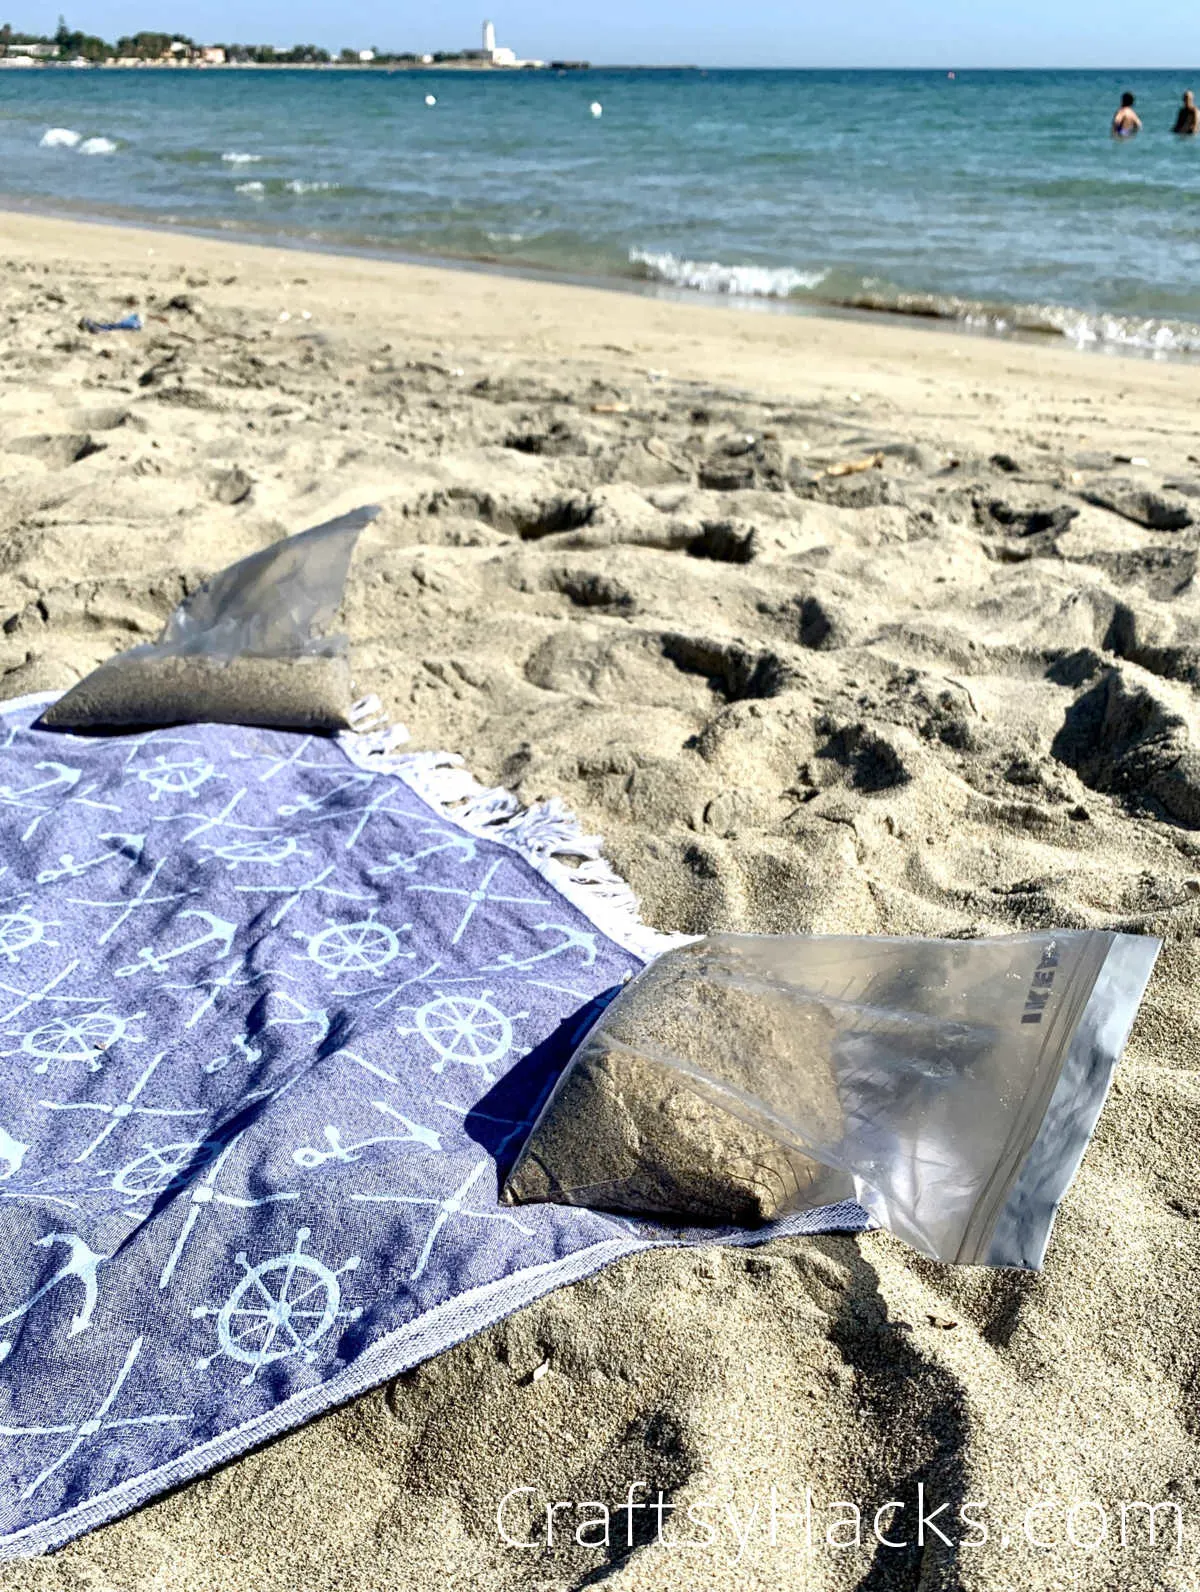 fill bags with sand as towel holders